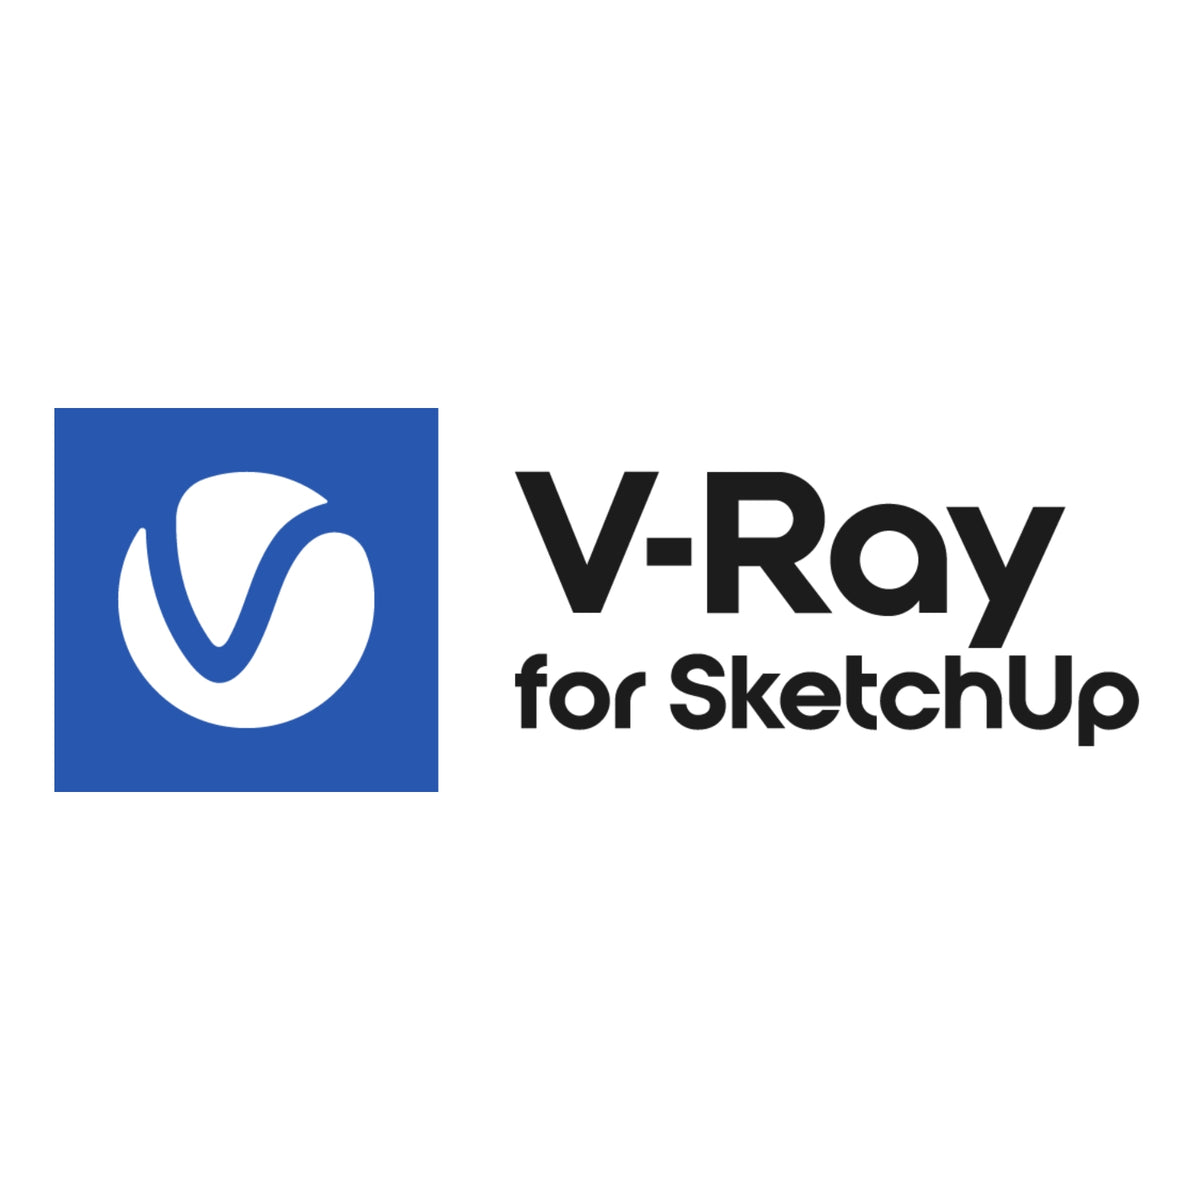 V-Ray for SketchUp 3D Rendering Software